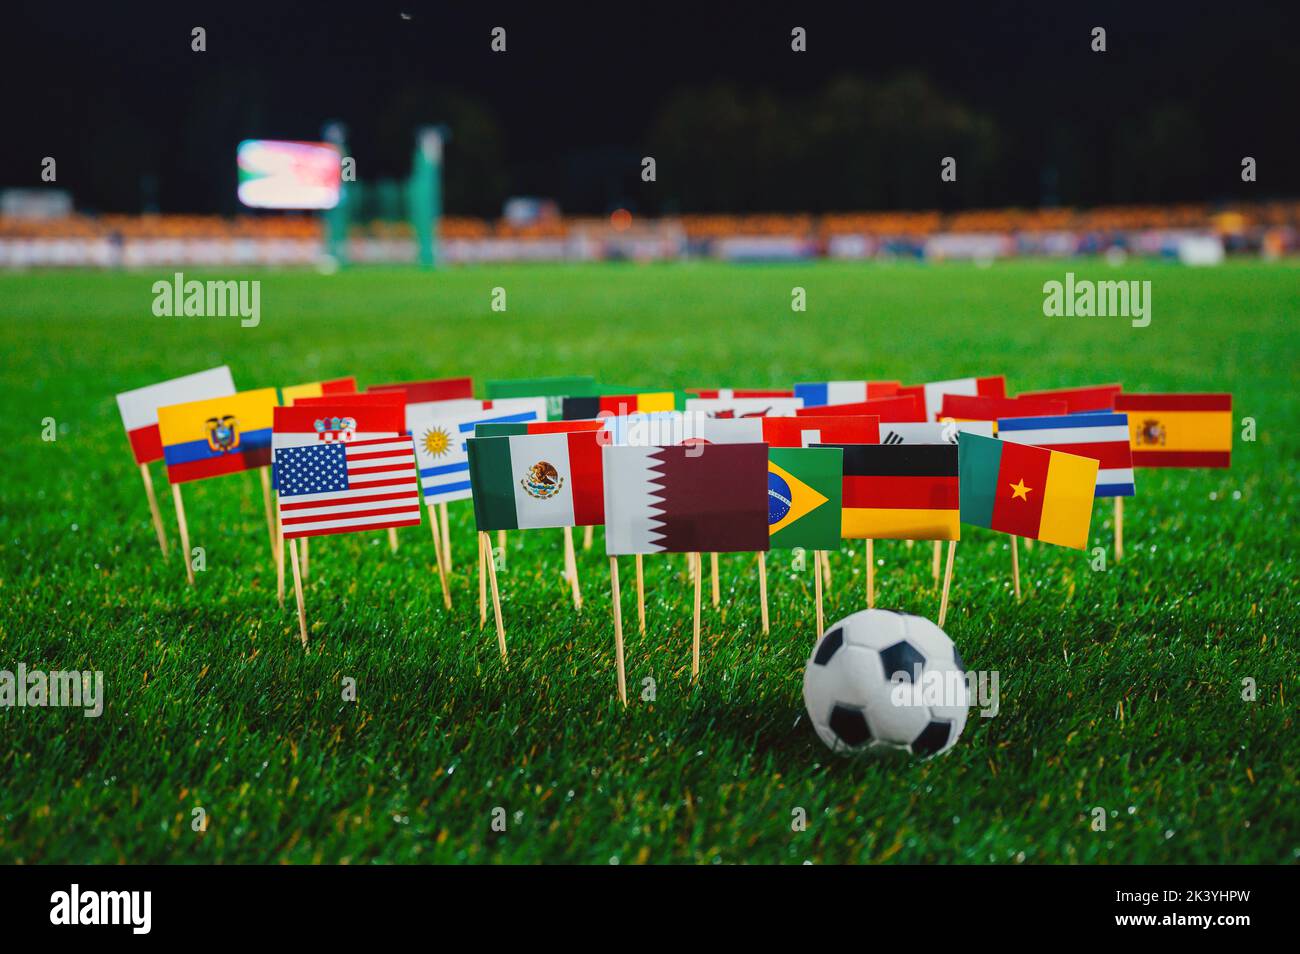 National flags of Qatar, Brazil, Germany, USA and other football countries on green grass of Stadium in night. Soccer ball, black background Stock Photo